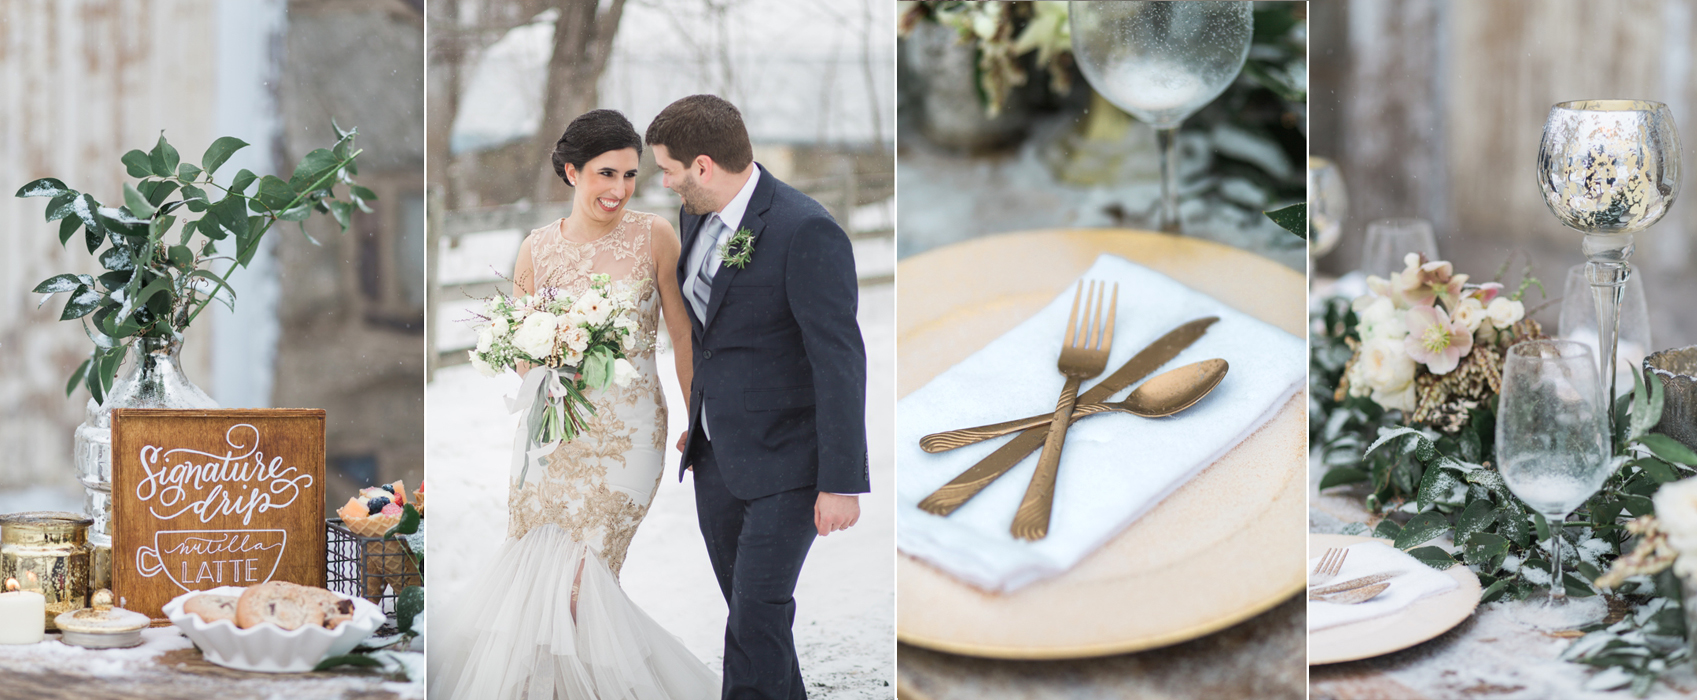 Winter-wedding-styled-shoot-NJ-table-and-chair-rental-beyond-the-barn-rentals-flowers-karry-patel-designs-antinuqe-donut-box-ribbon-honey-silks-and-co.-calligraphy-penned-by-alice- Invitation-design-bella-carta-boutique-published-red-oak-weddings